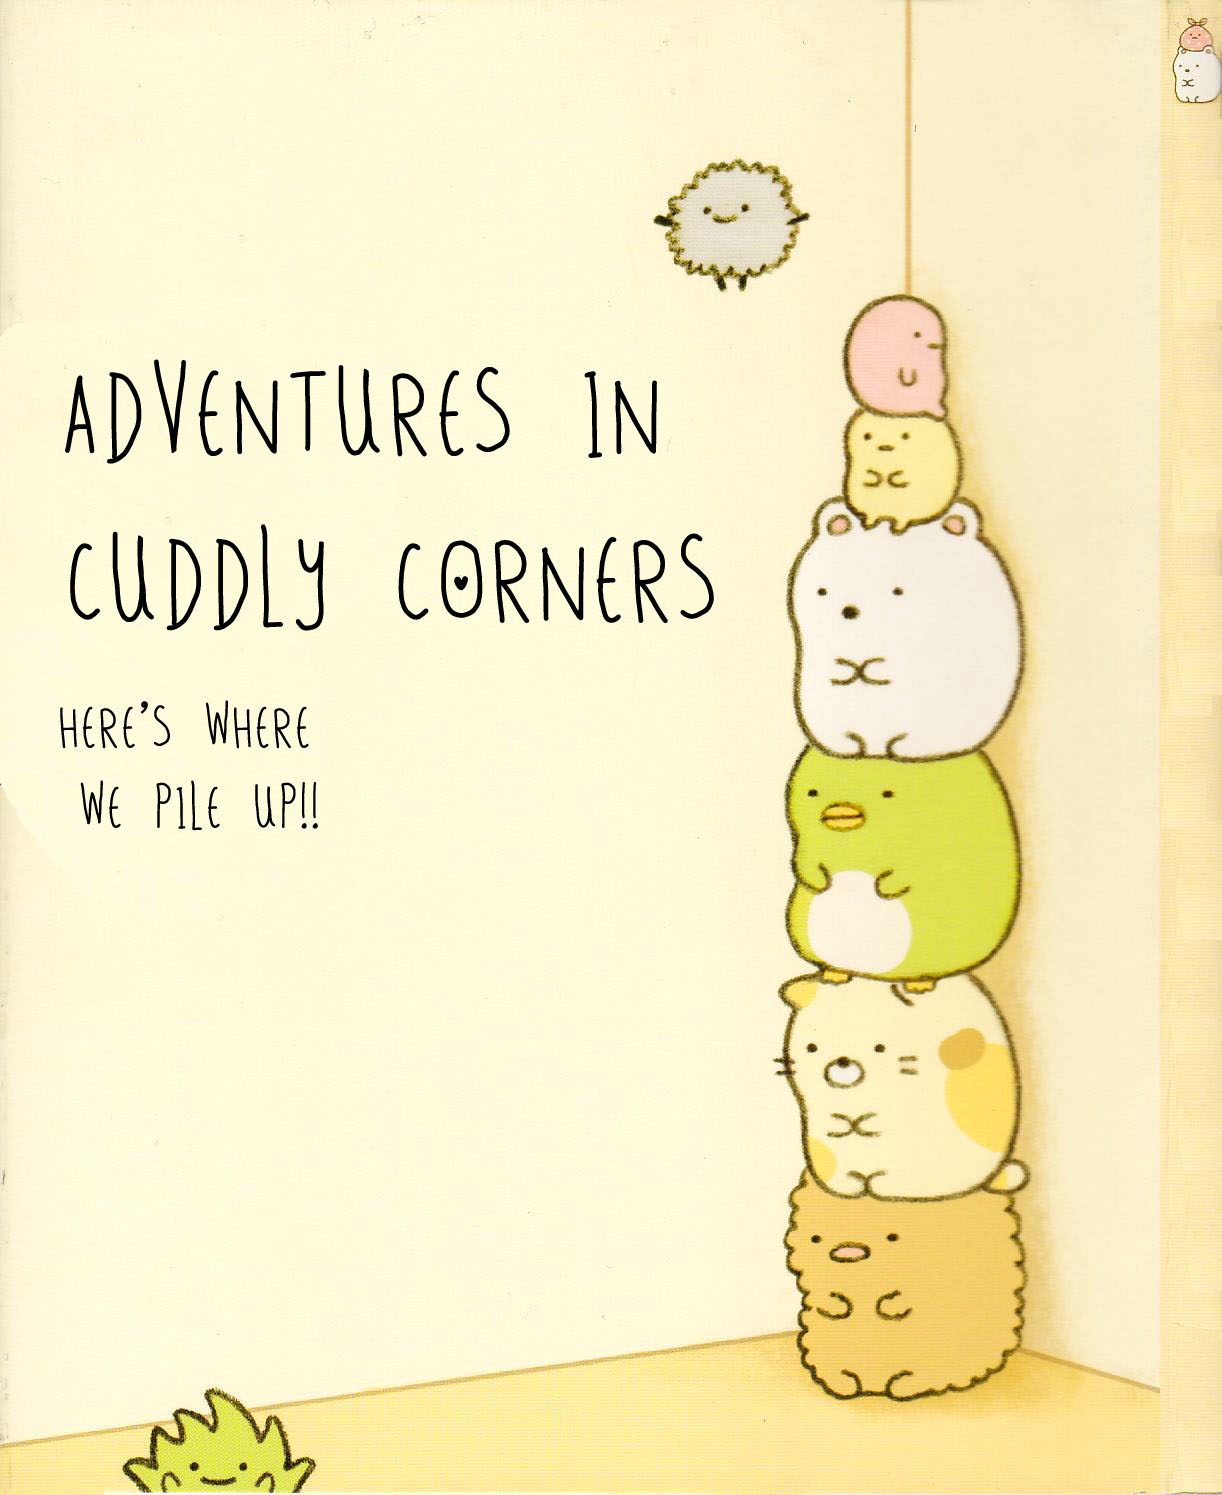 Adventures in Cuddly Corners Vol. 1 Ch. 1 In the Sofa